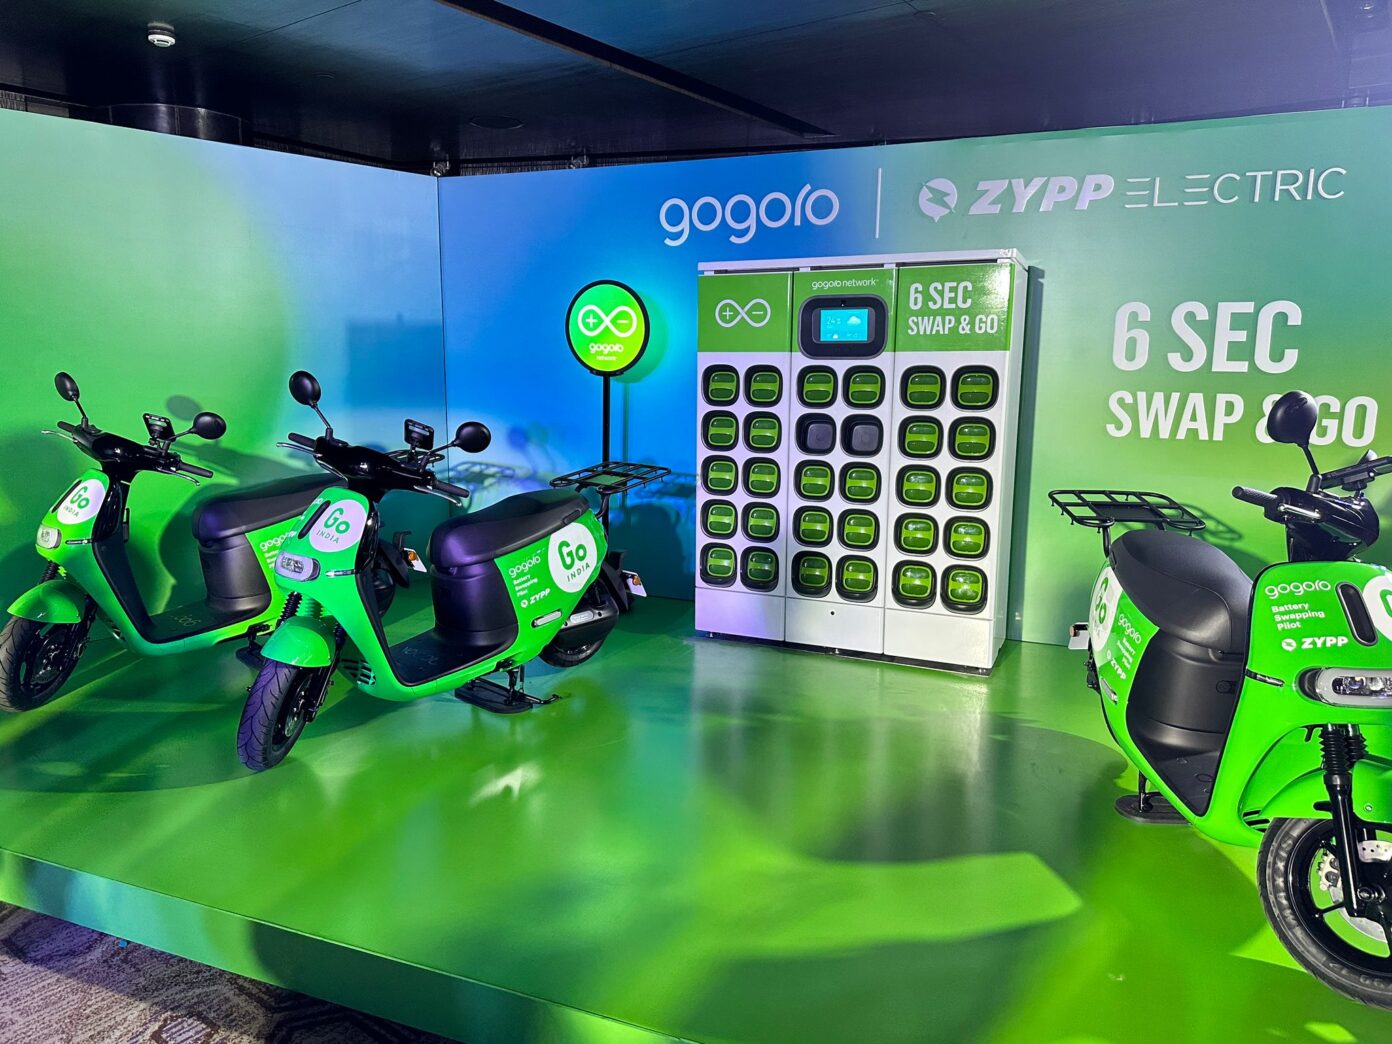 Battery Swapping Giant Gogoro Enters India, Partners with Zypp Electric